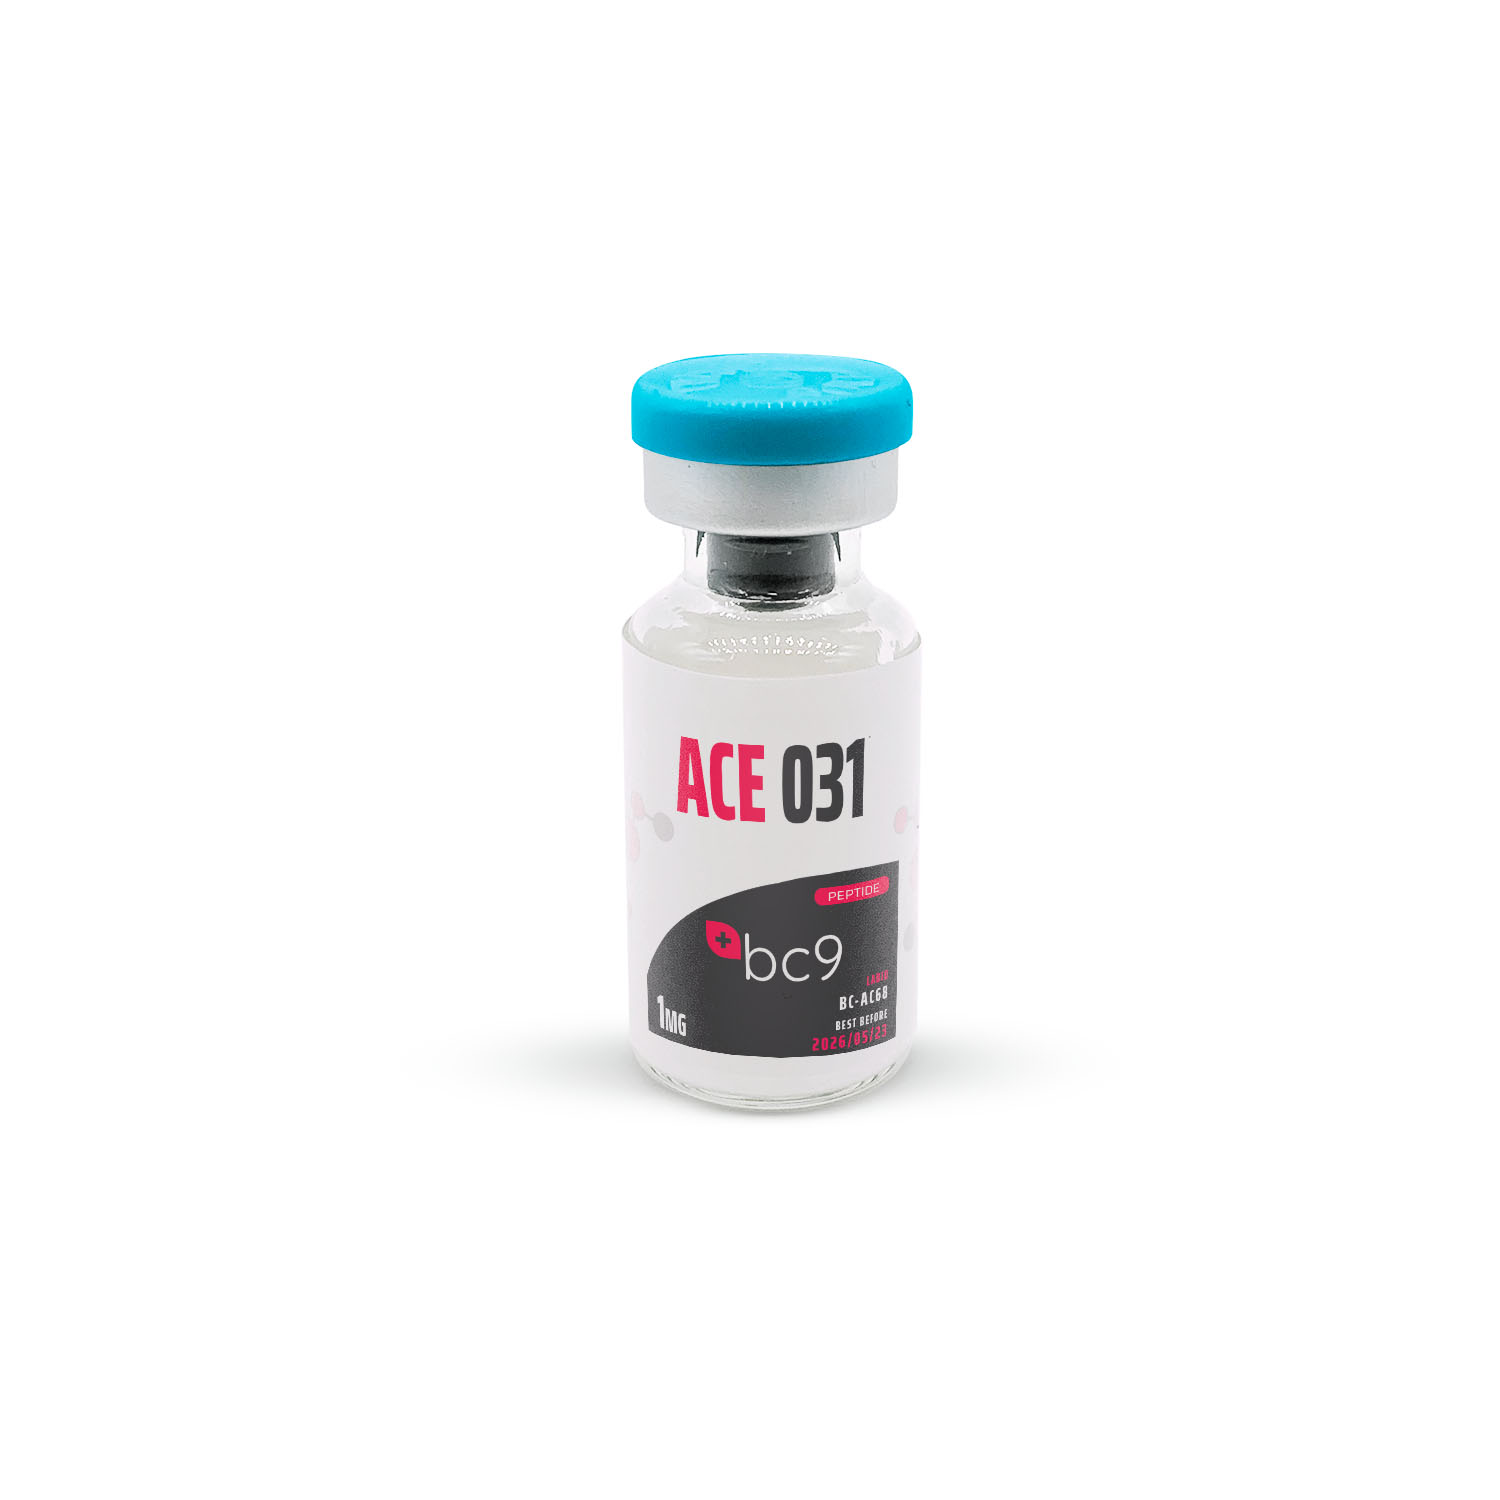 ACE 031 Peptide for Sale | Fast Shipping | BC9.org